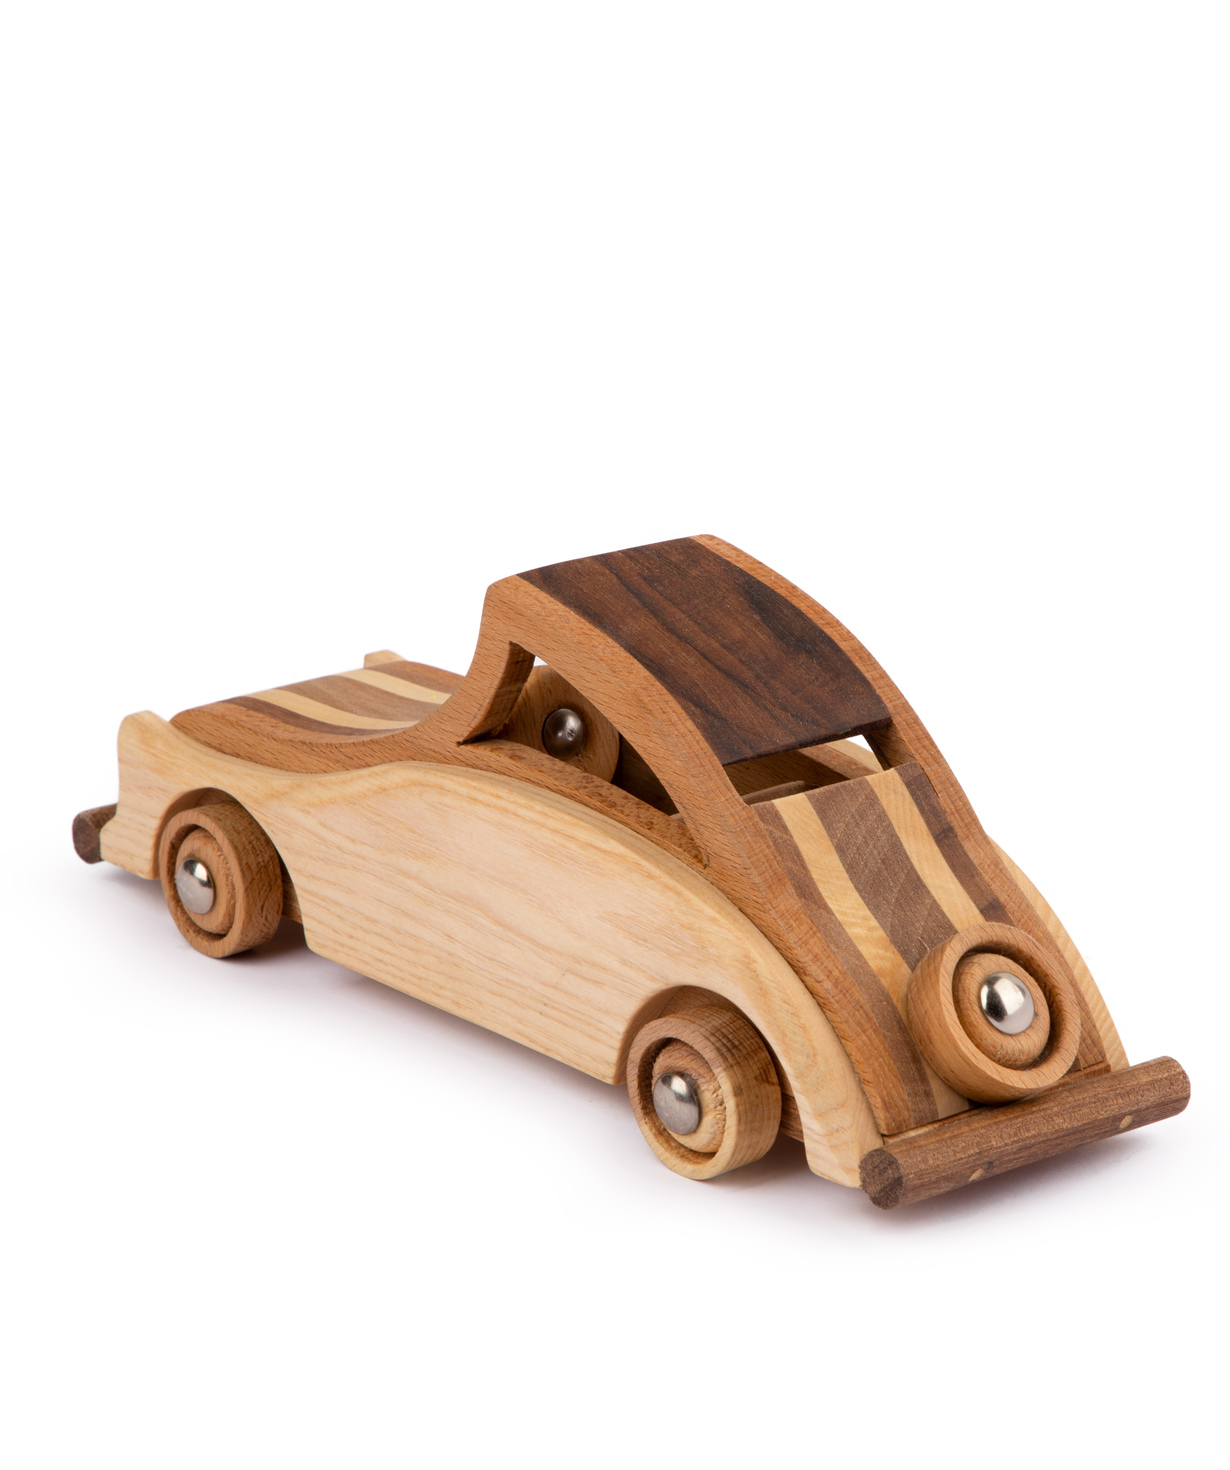 Toy `I'm wooden toys` wooden, retro car